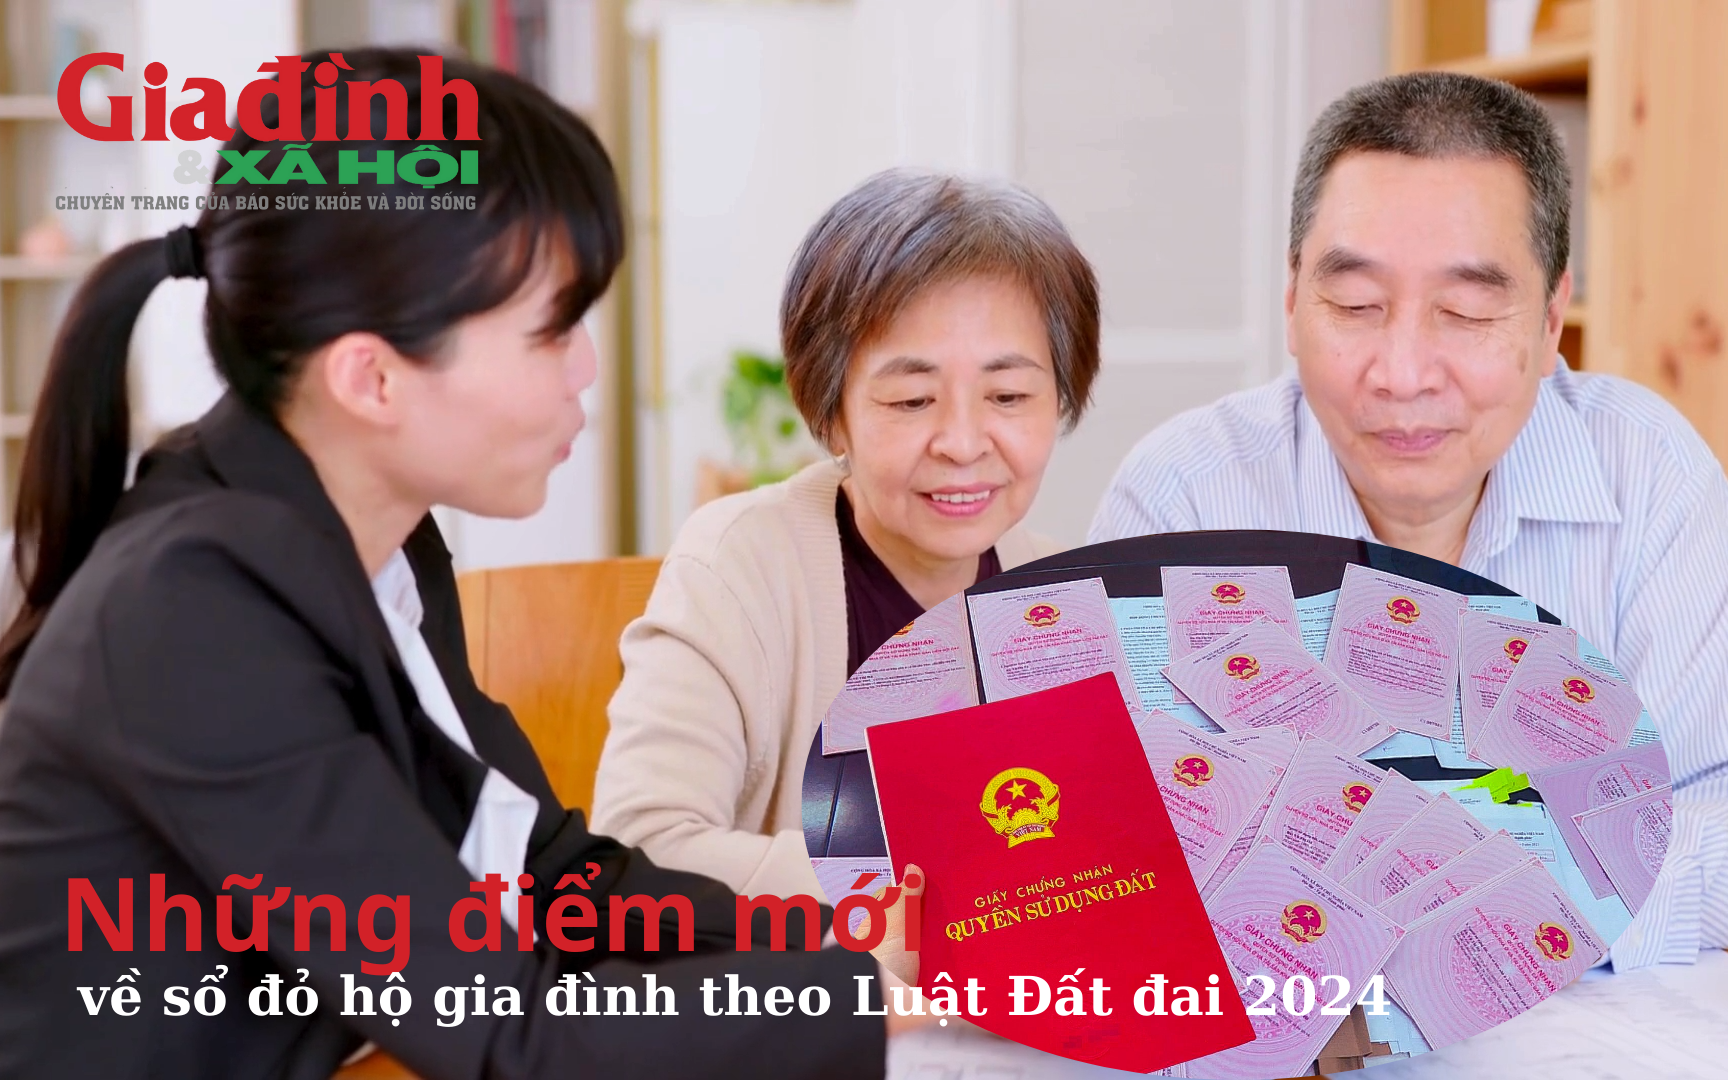 nhung-diem-moi-ve-so-do-ho-gia-dinh-theo-luat-dat-dai-2024-1716804061258297015040-0-28-1080-1756-crop-1716804077436125010419.png